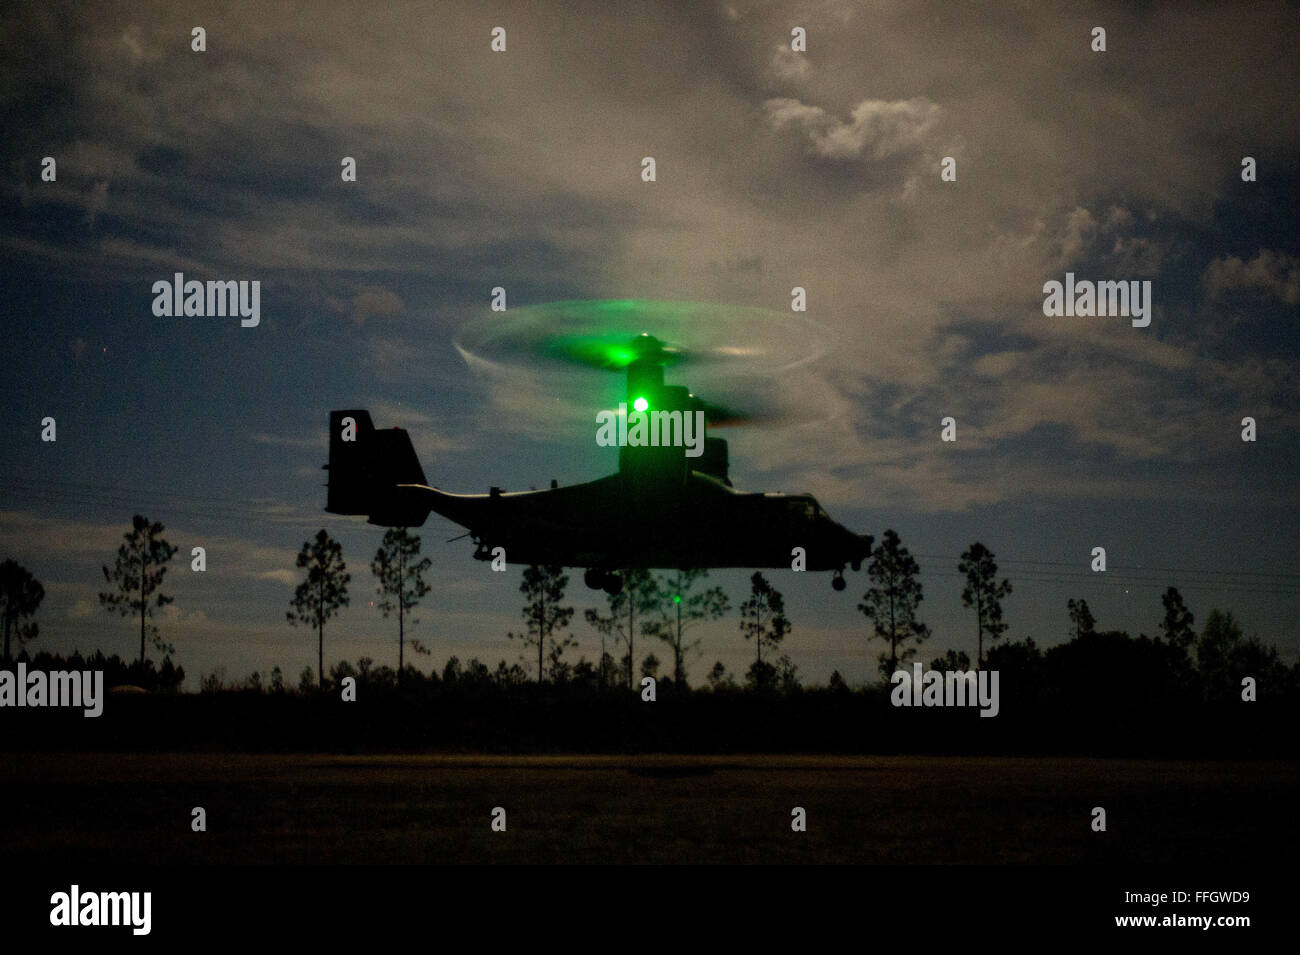 A U.S. Air Force CV-22 Osprey lands in a field during the Emerald Warrior exercise at Hurlburt Field, Fla. Stock Photo